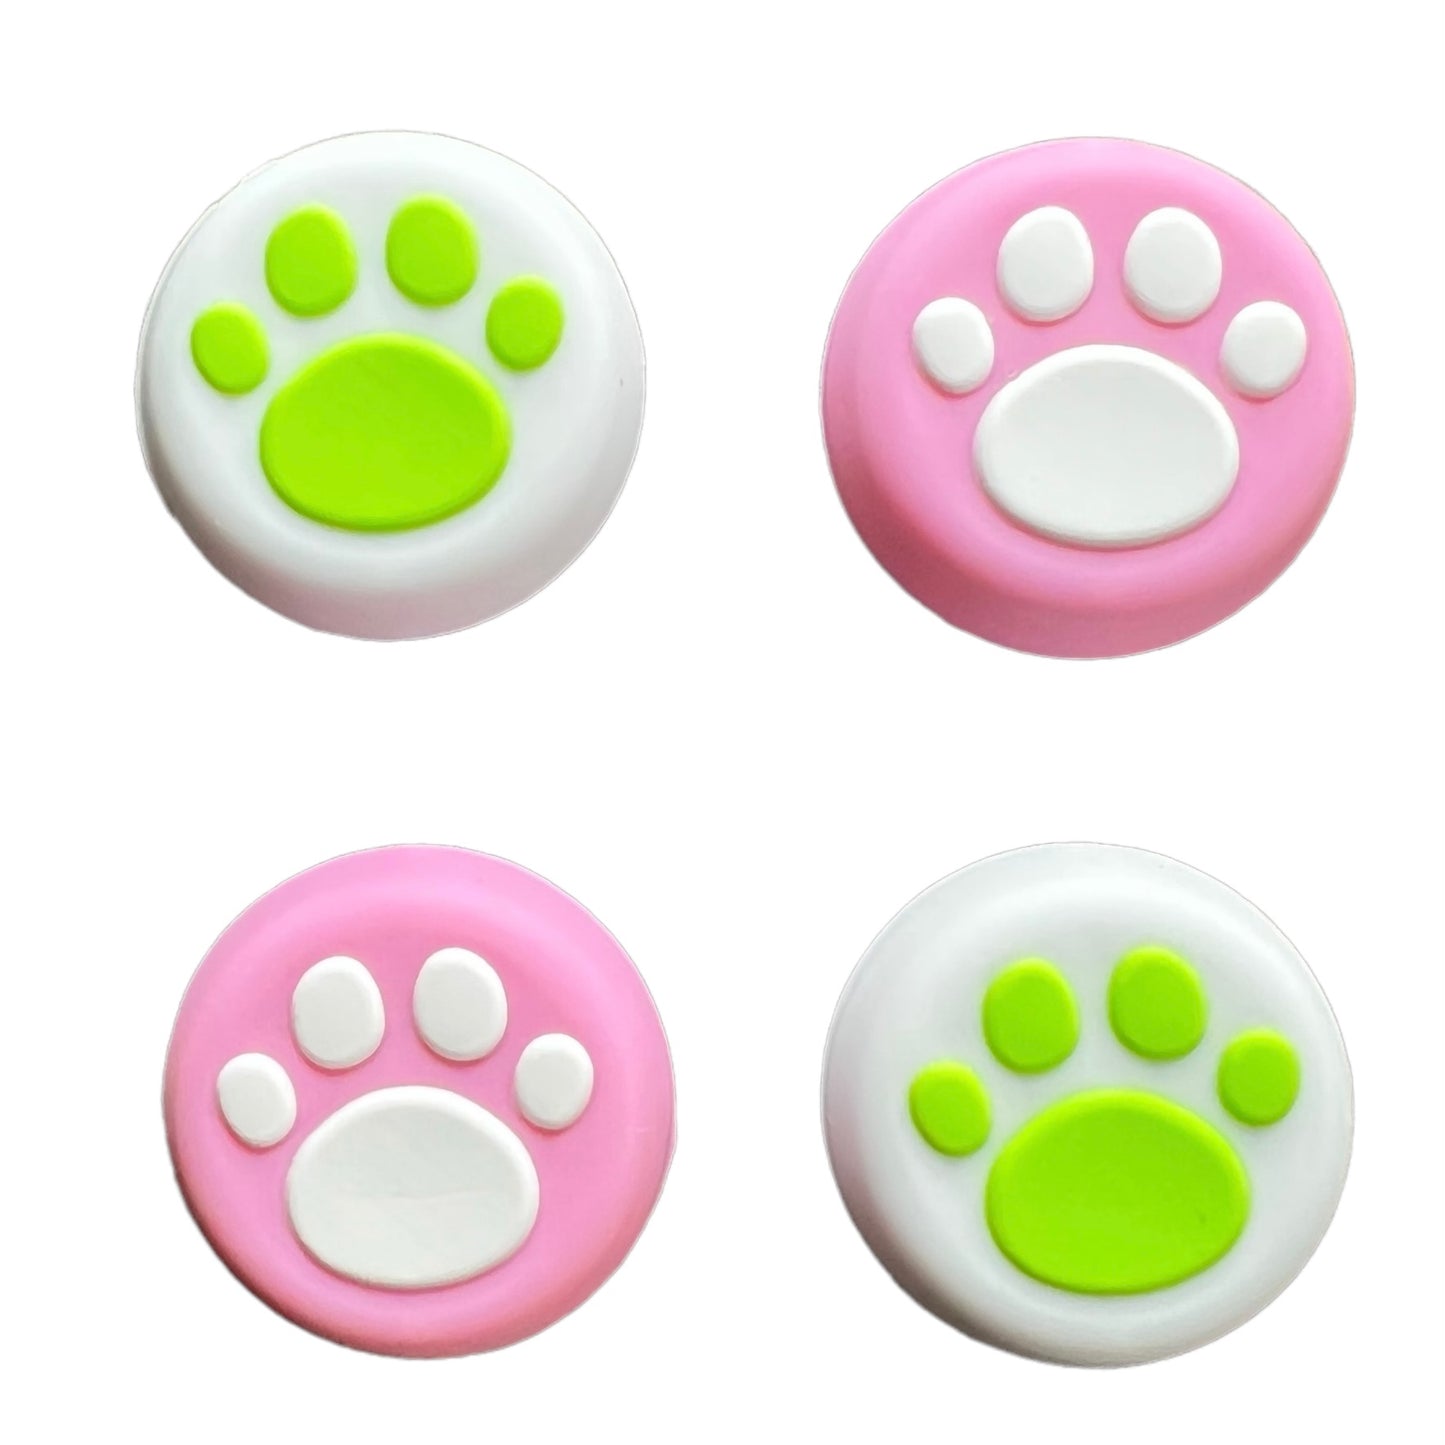 JenDore Pink Green White Mix Paws 4Pcs Silicone Thumb Grip Caps for Nintendo Switch Pro, PS5, PS4, and Xbox 360 Controller